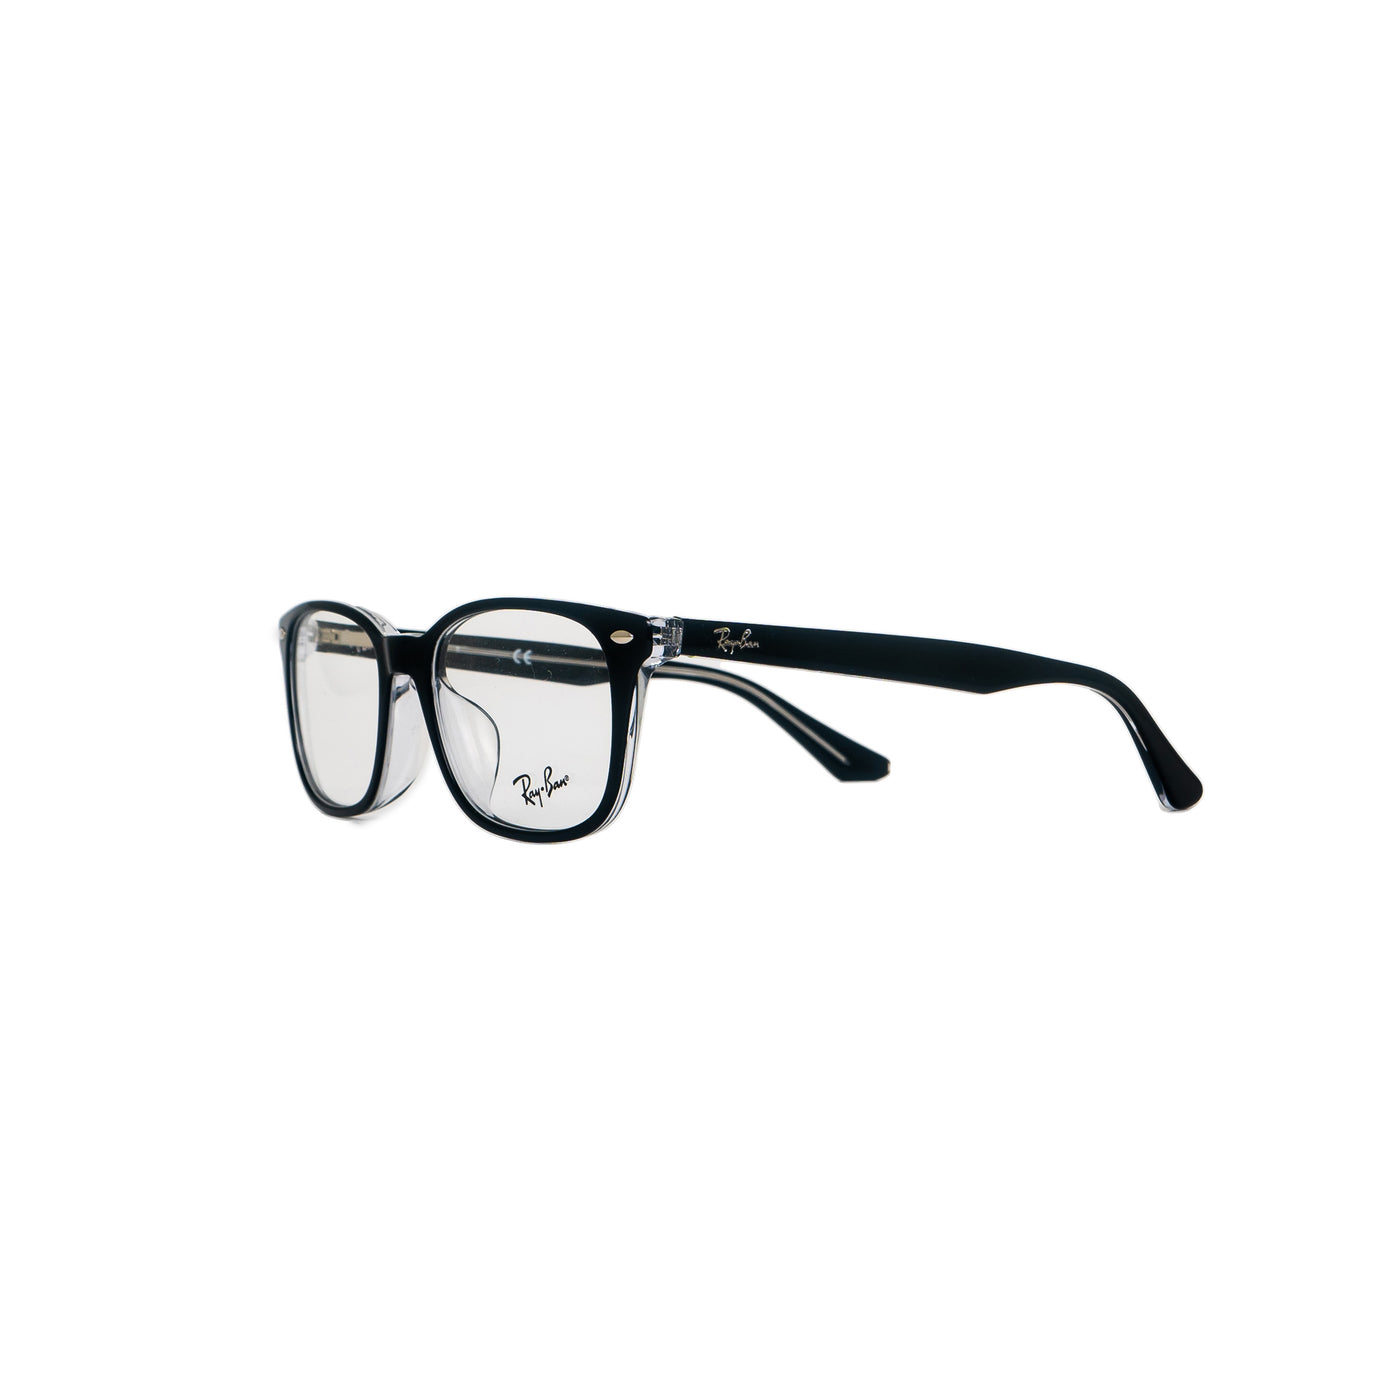 Ray-Ban RB5375F203453 | Eyeglasses - Vision Express Optical Philippines